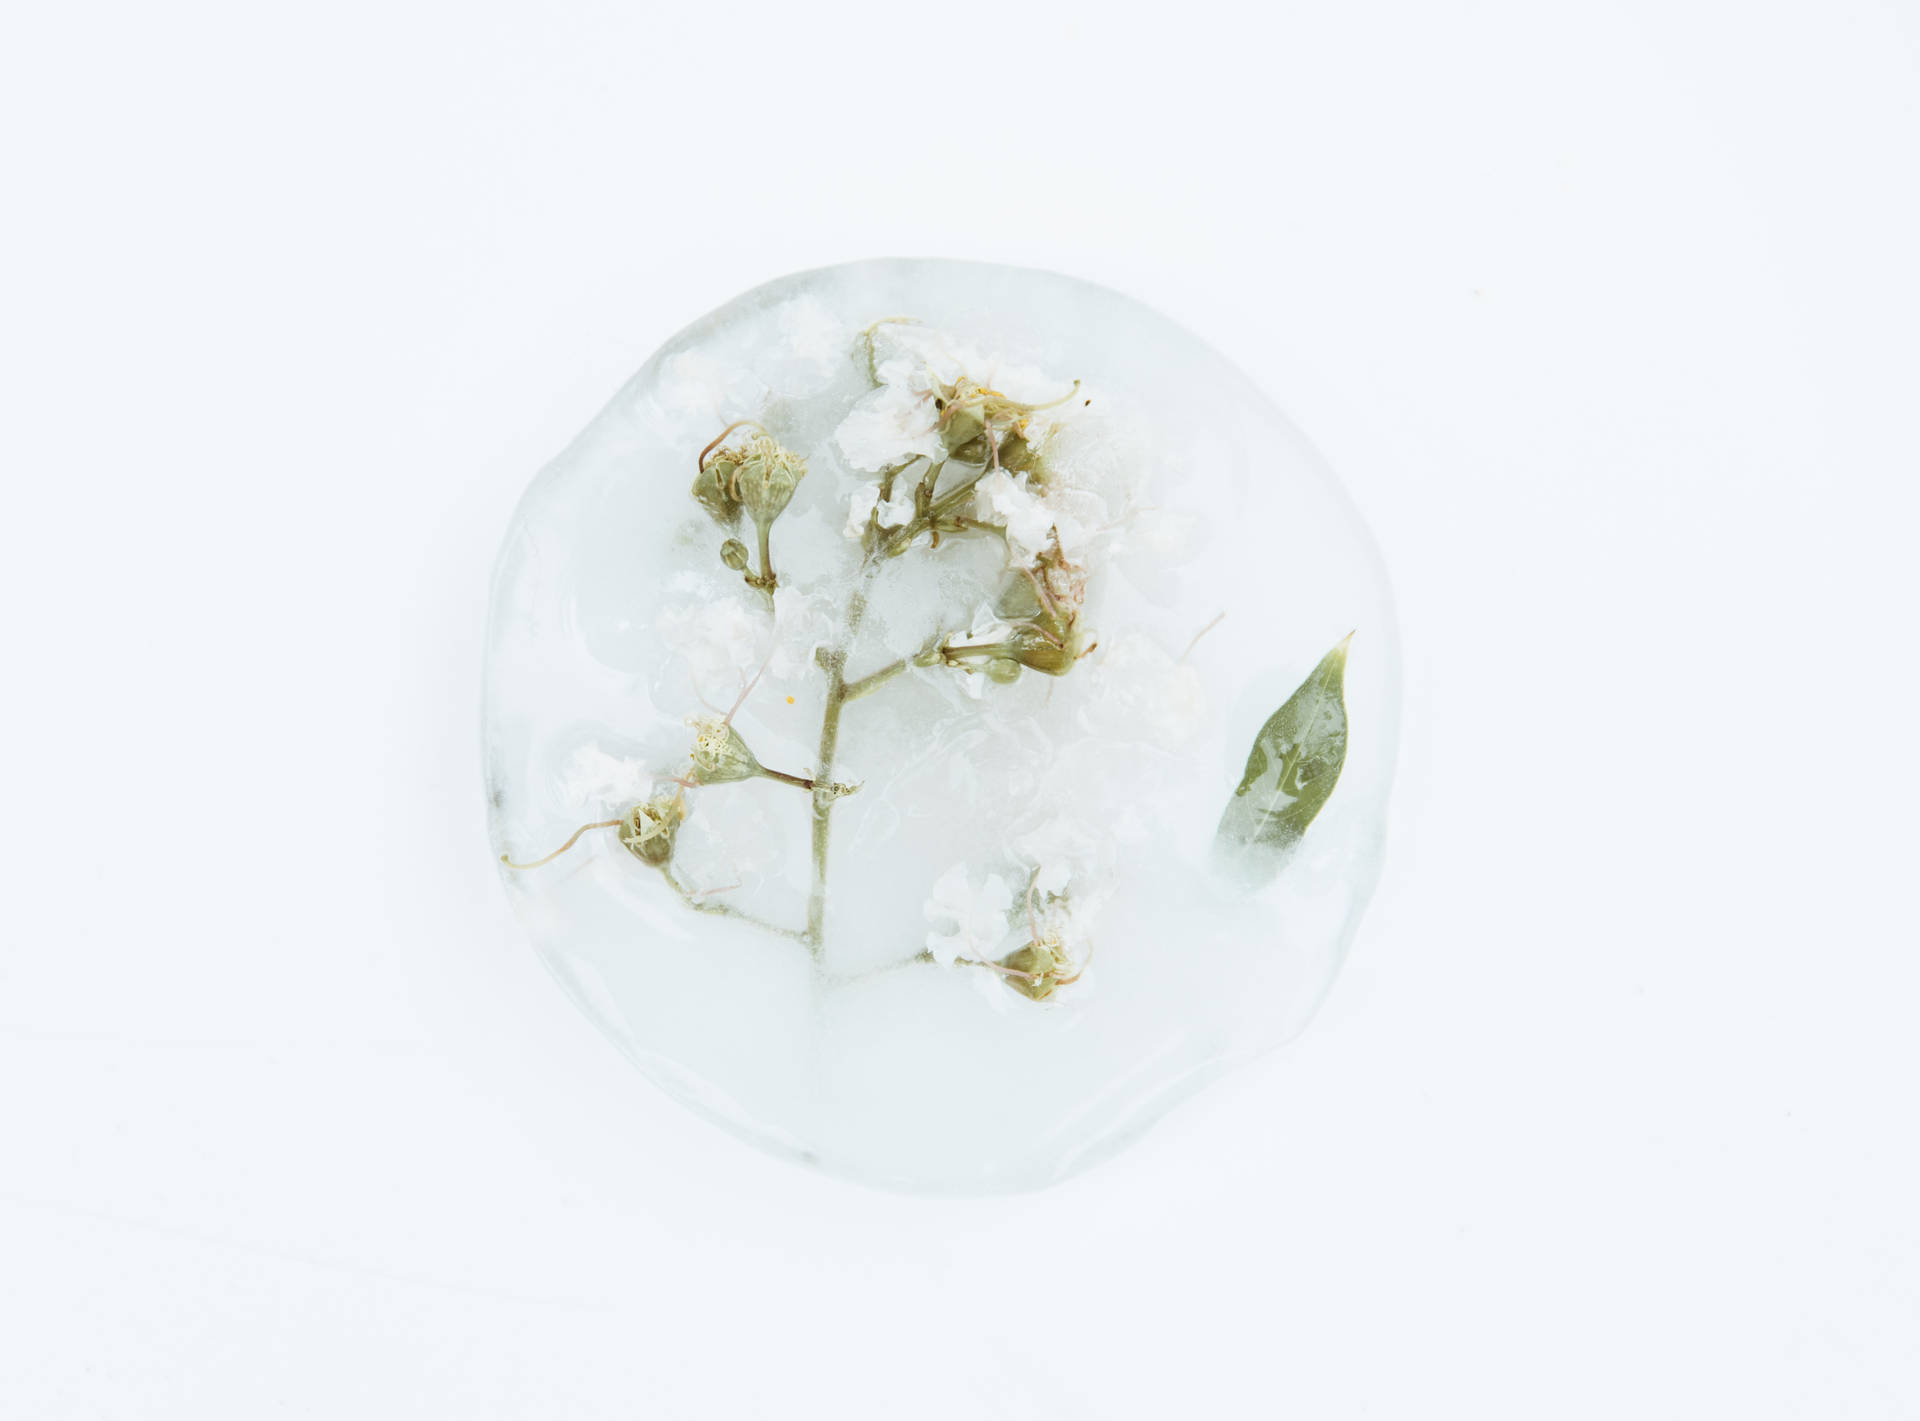 Dried Flowers In White Background